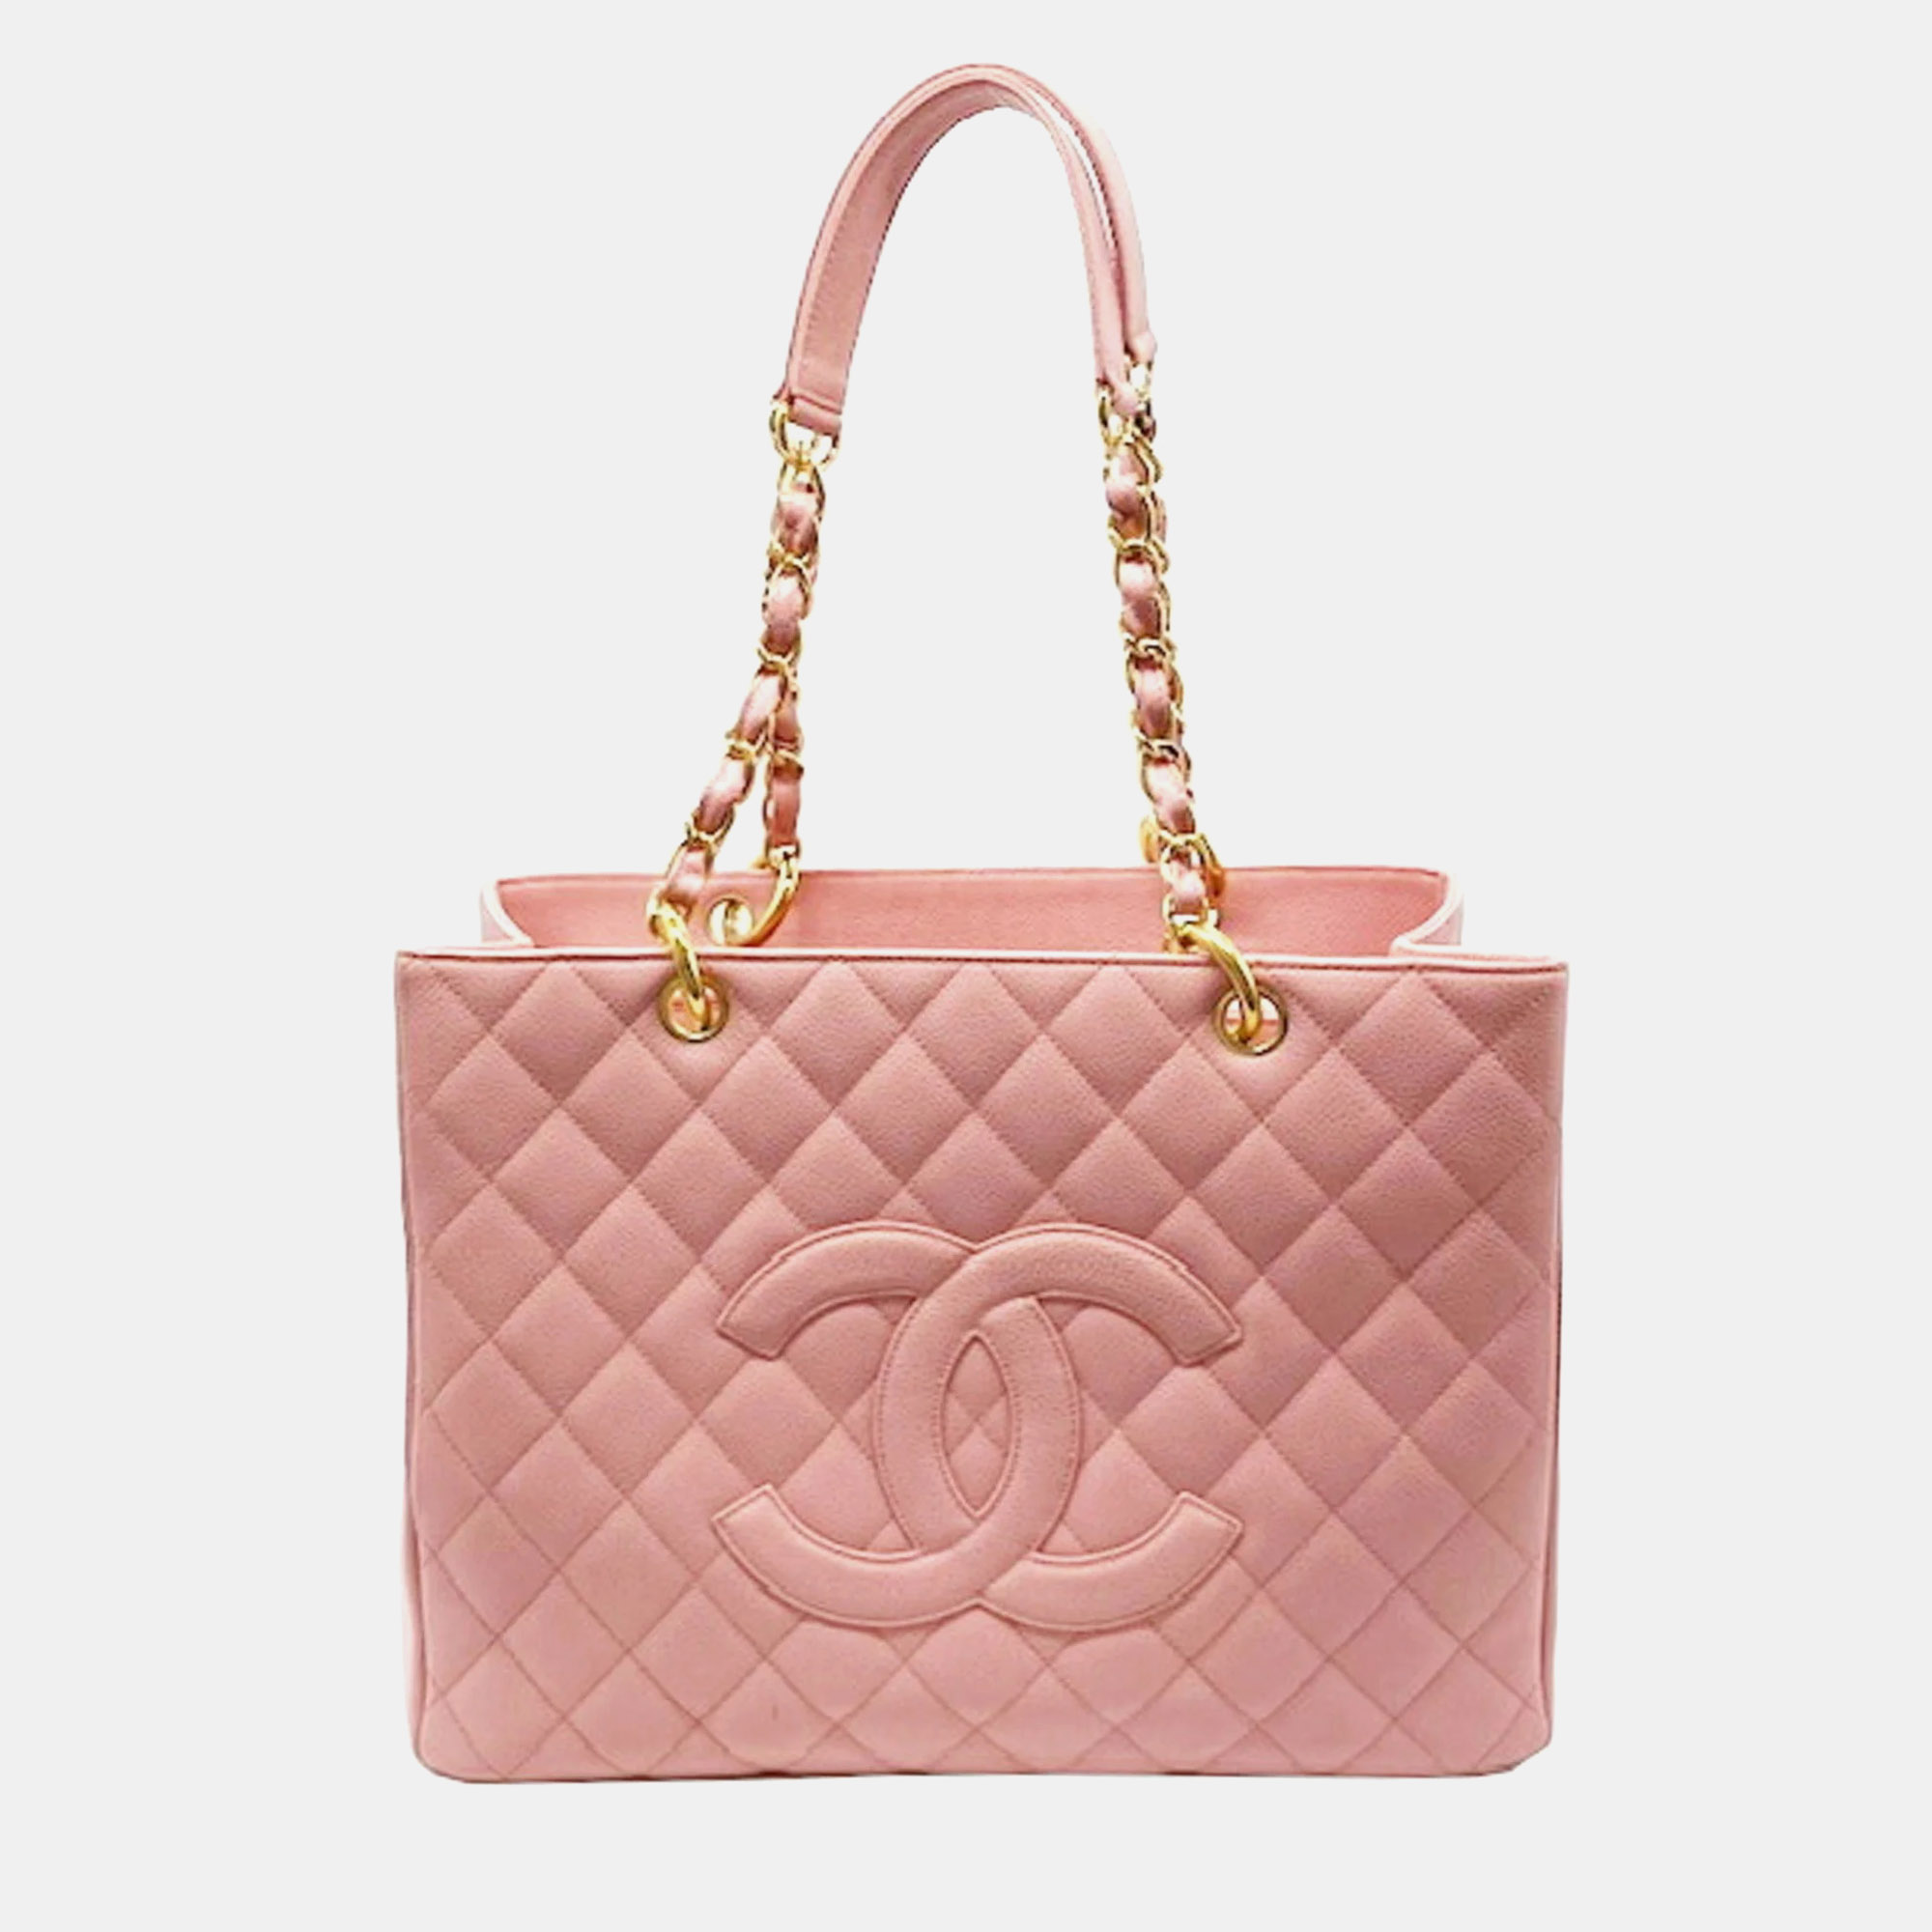 

Chanel Pink Caviar Leather GST Tote Bag